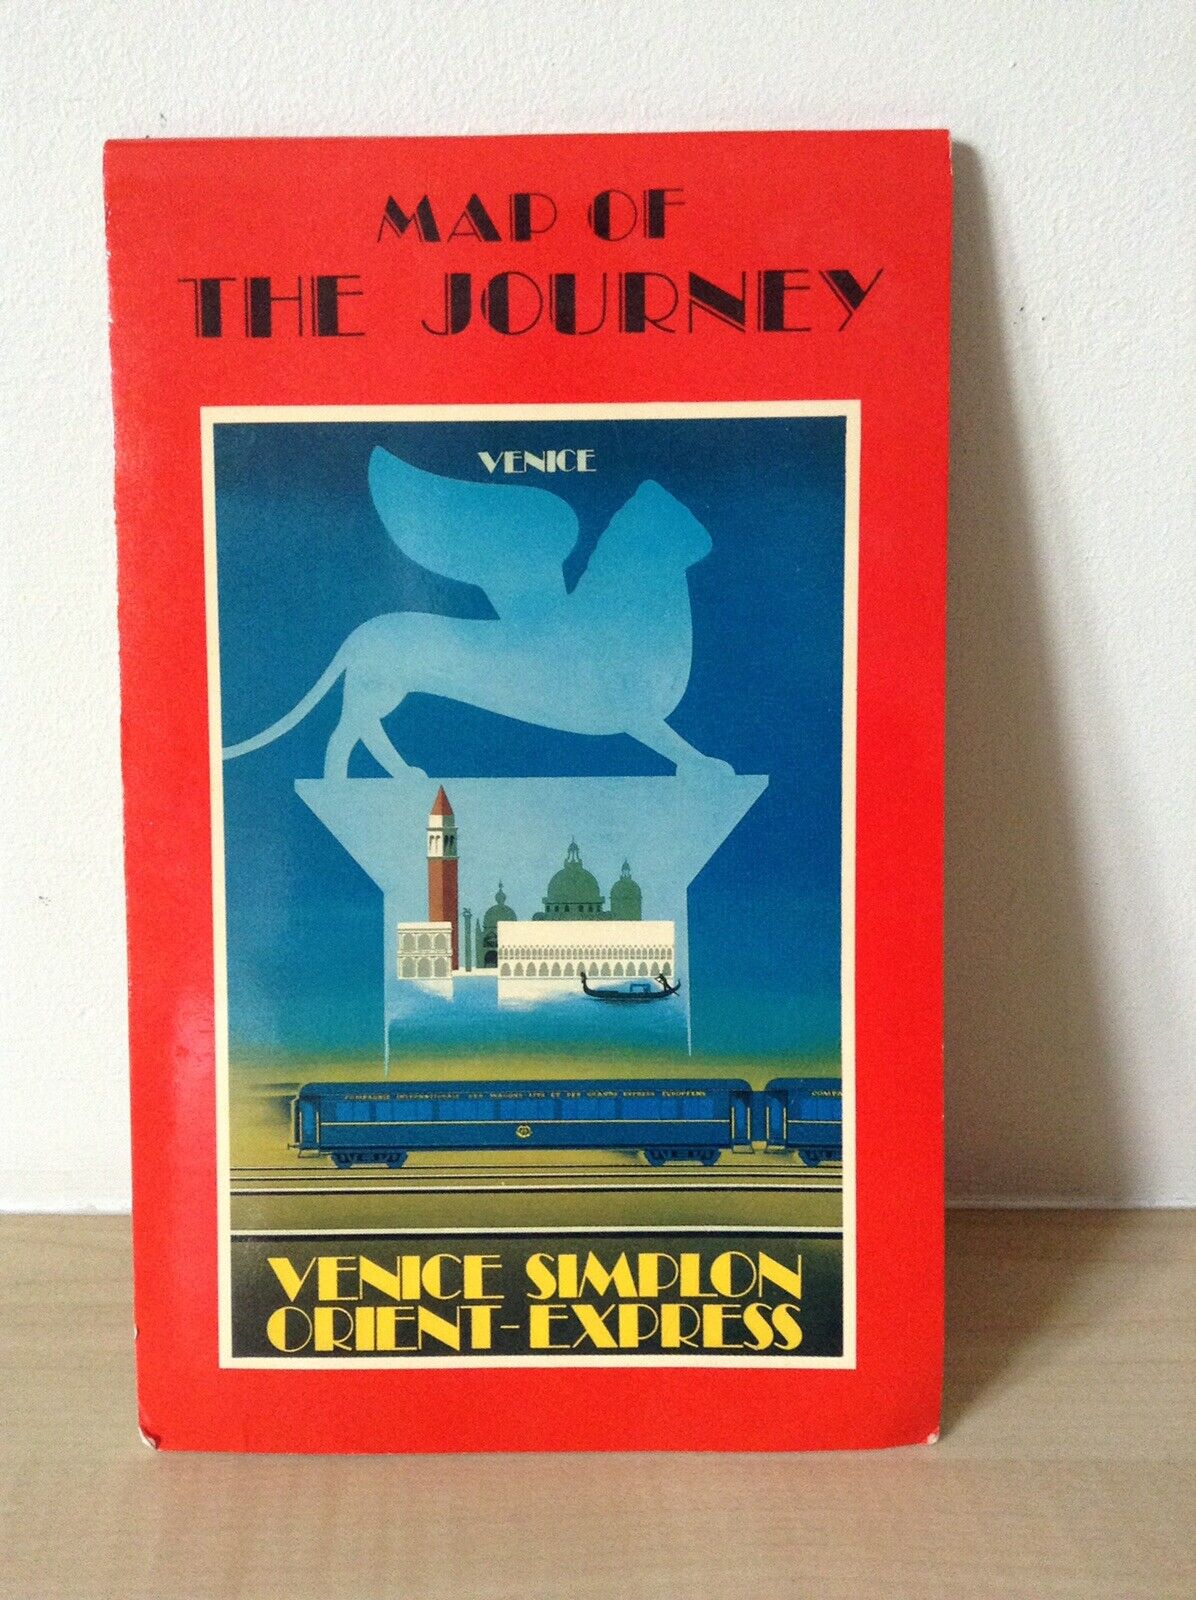 Rare Vintage Venice Simplon Orient-Express Foldable Map of the journey. Used. GC